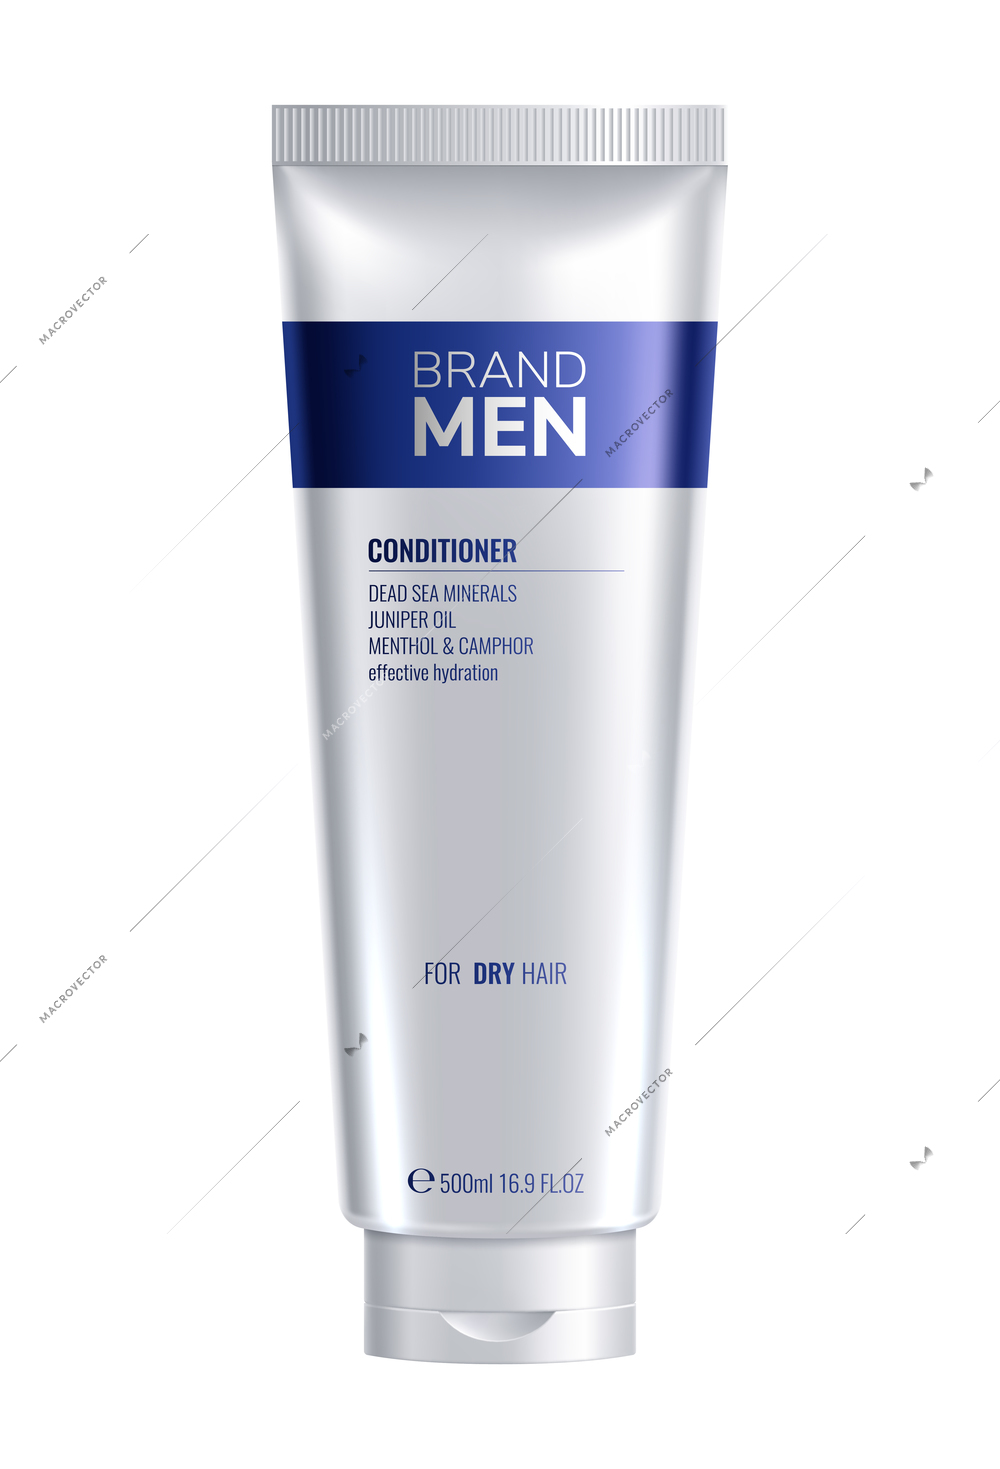 Realistic white and blue hair conditioner tube for men vector illustration